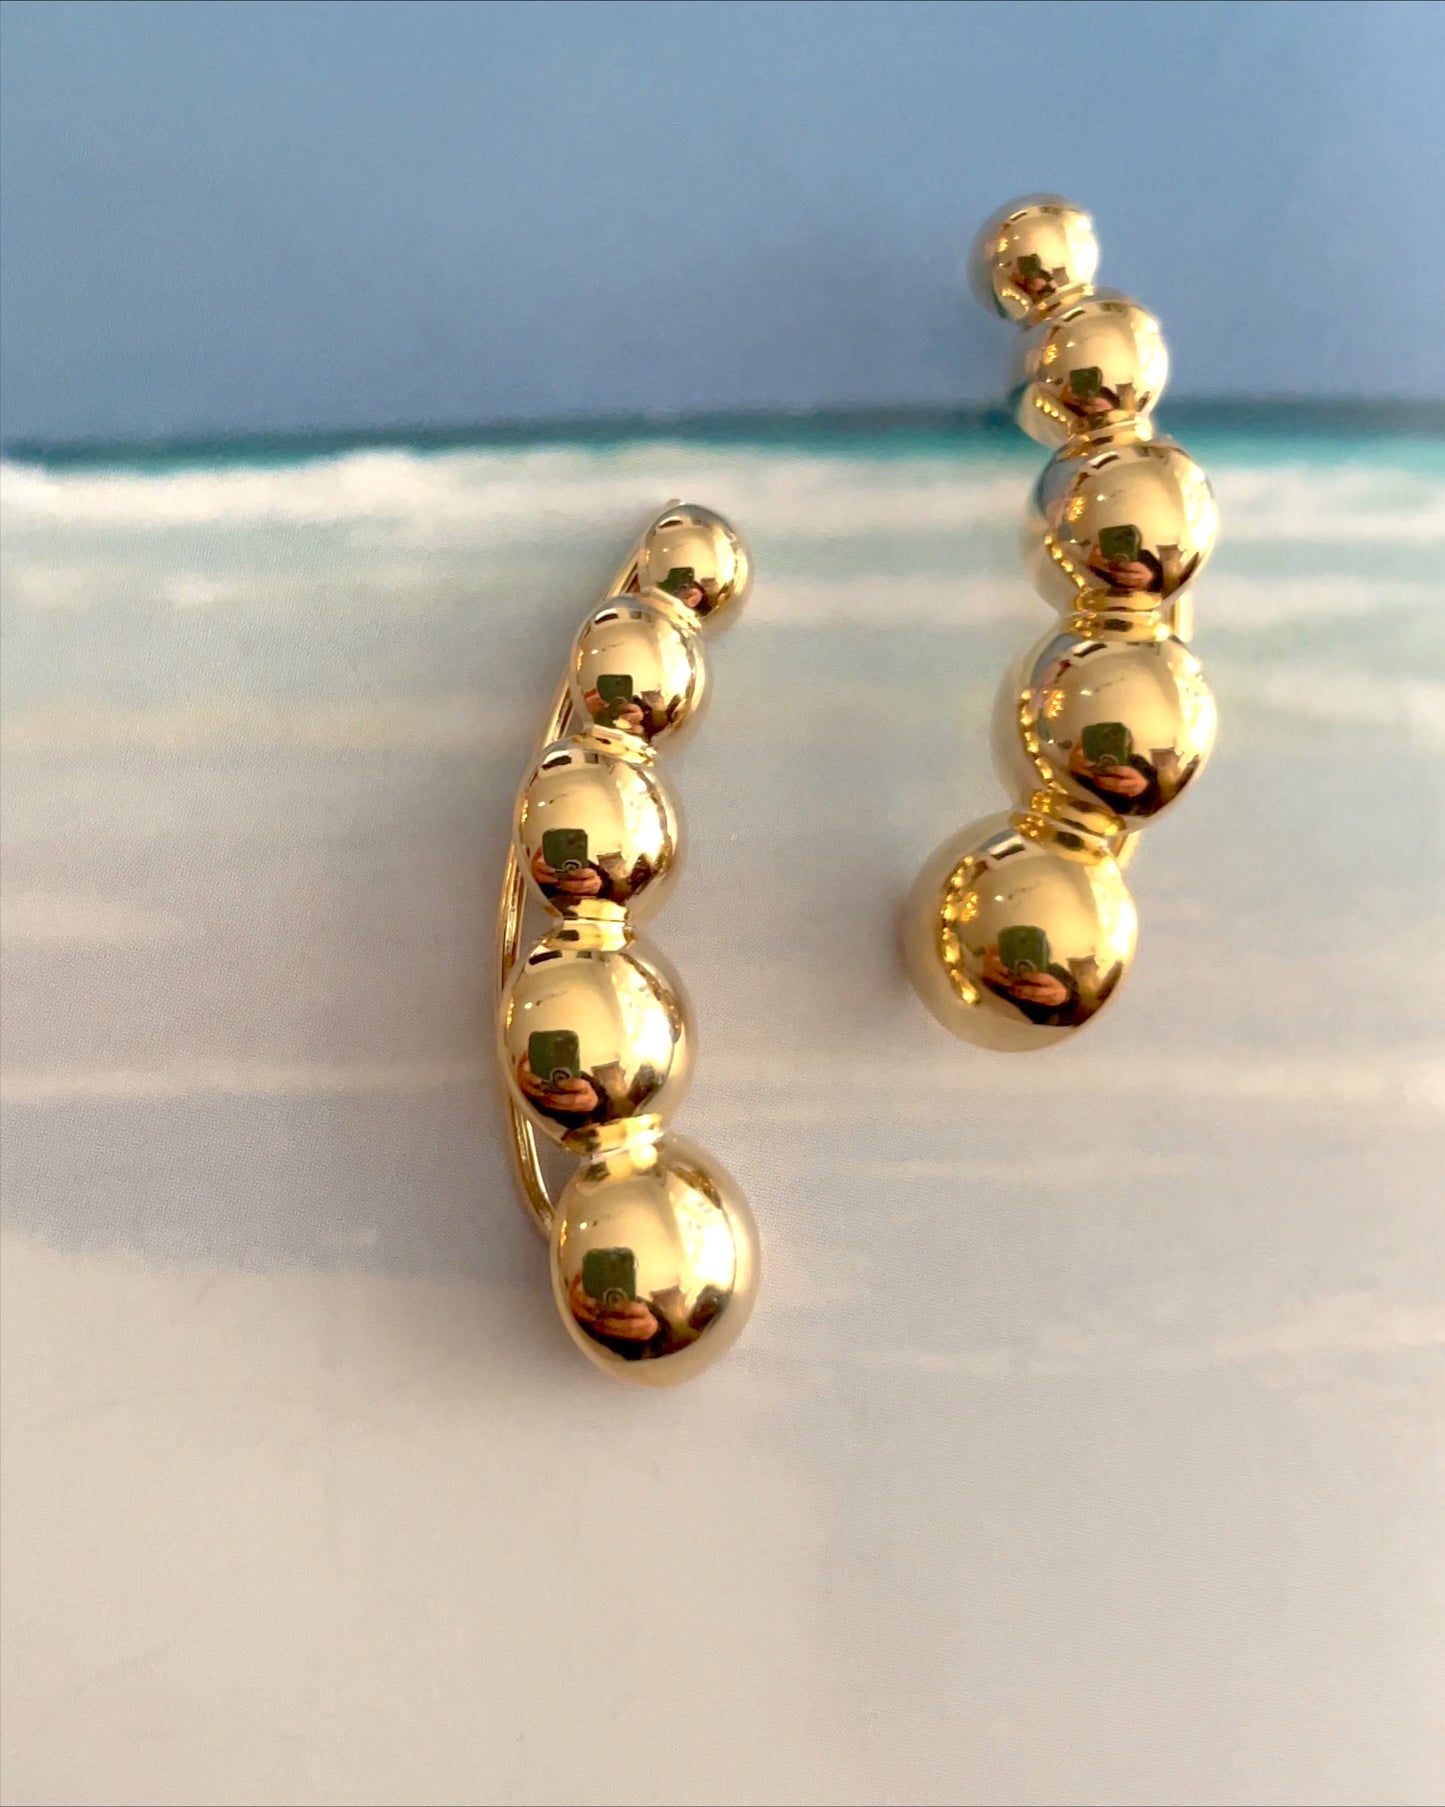 Dotted-up earrings